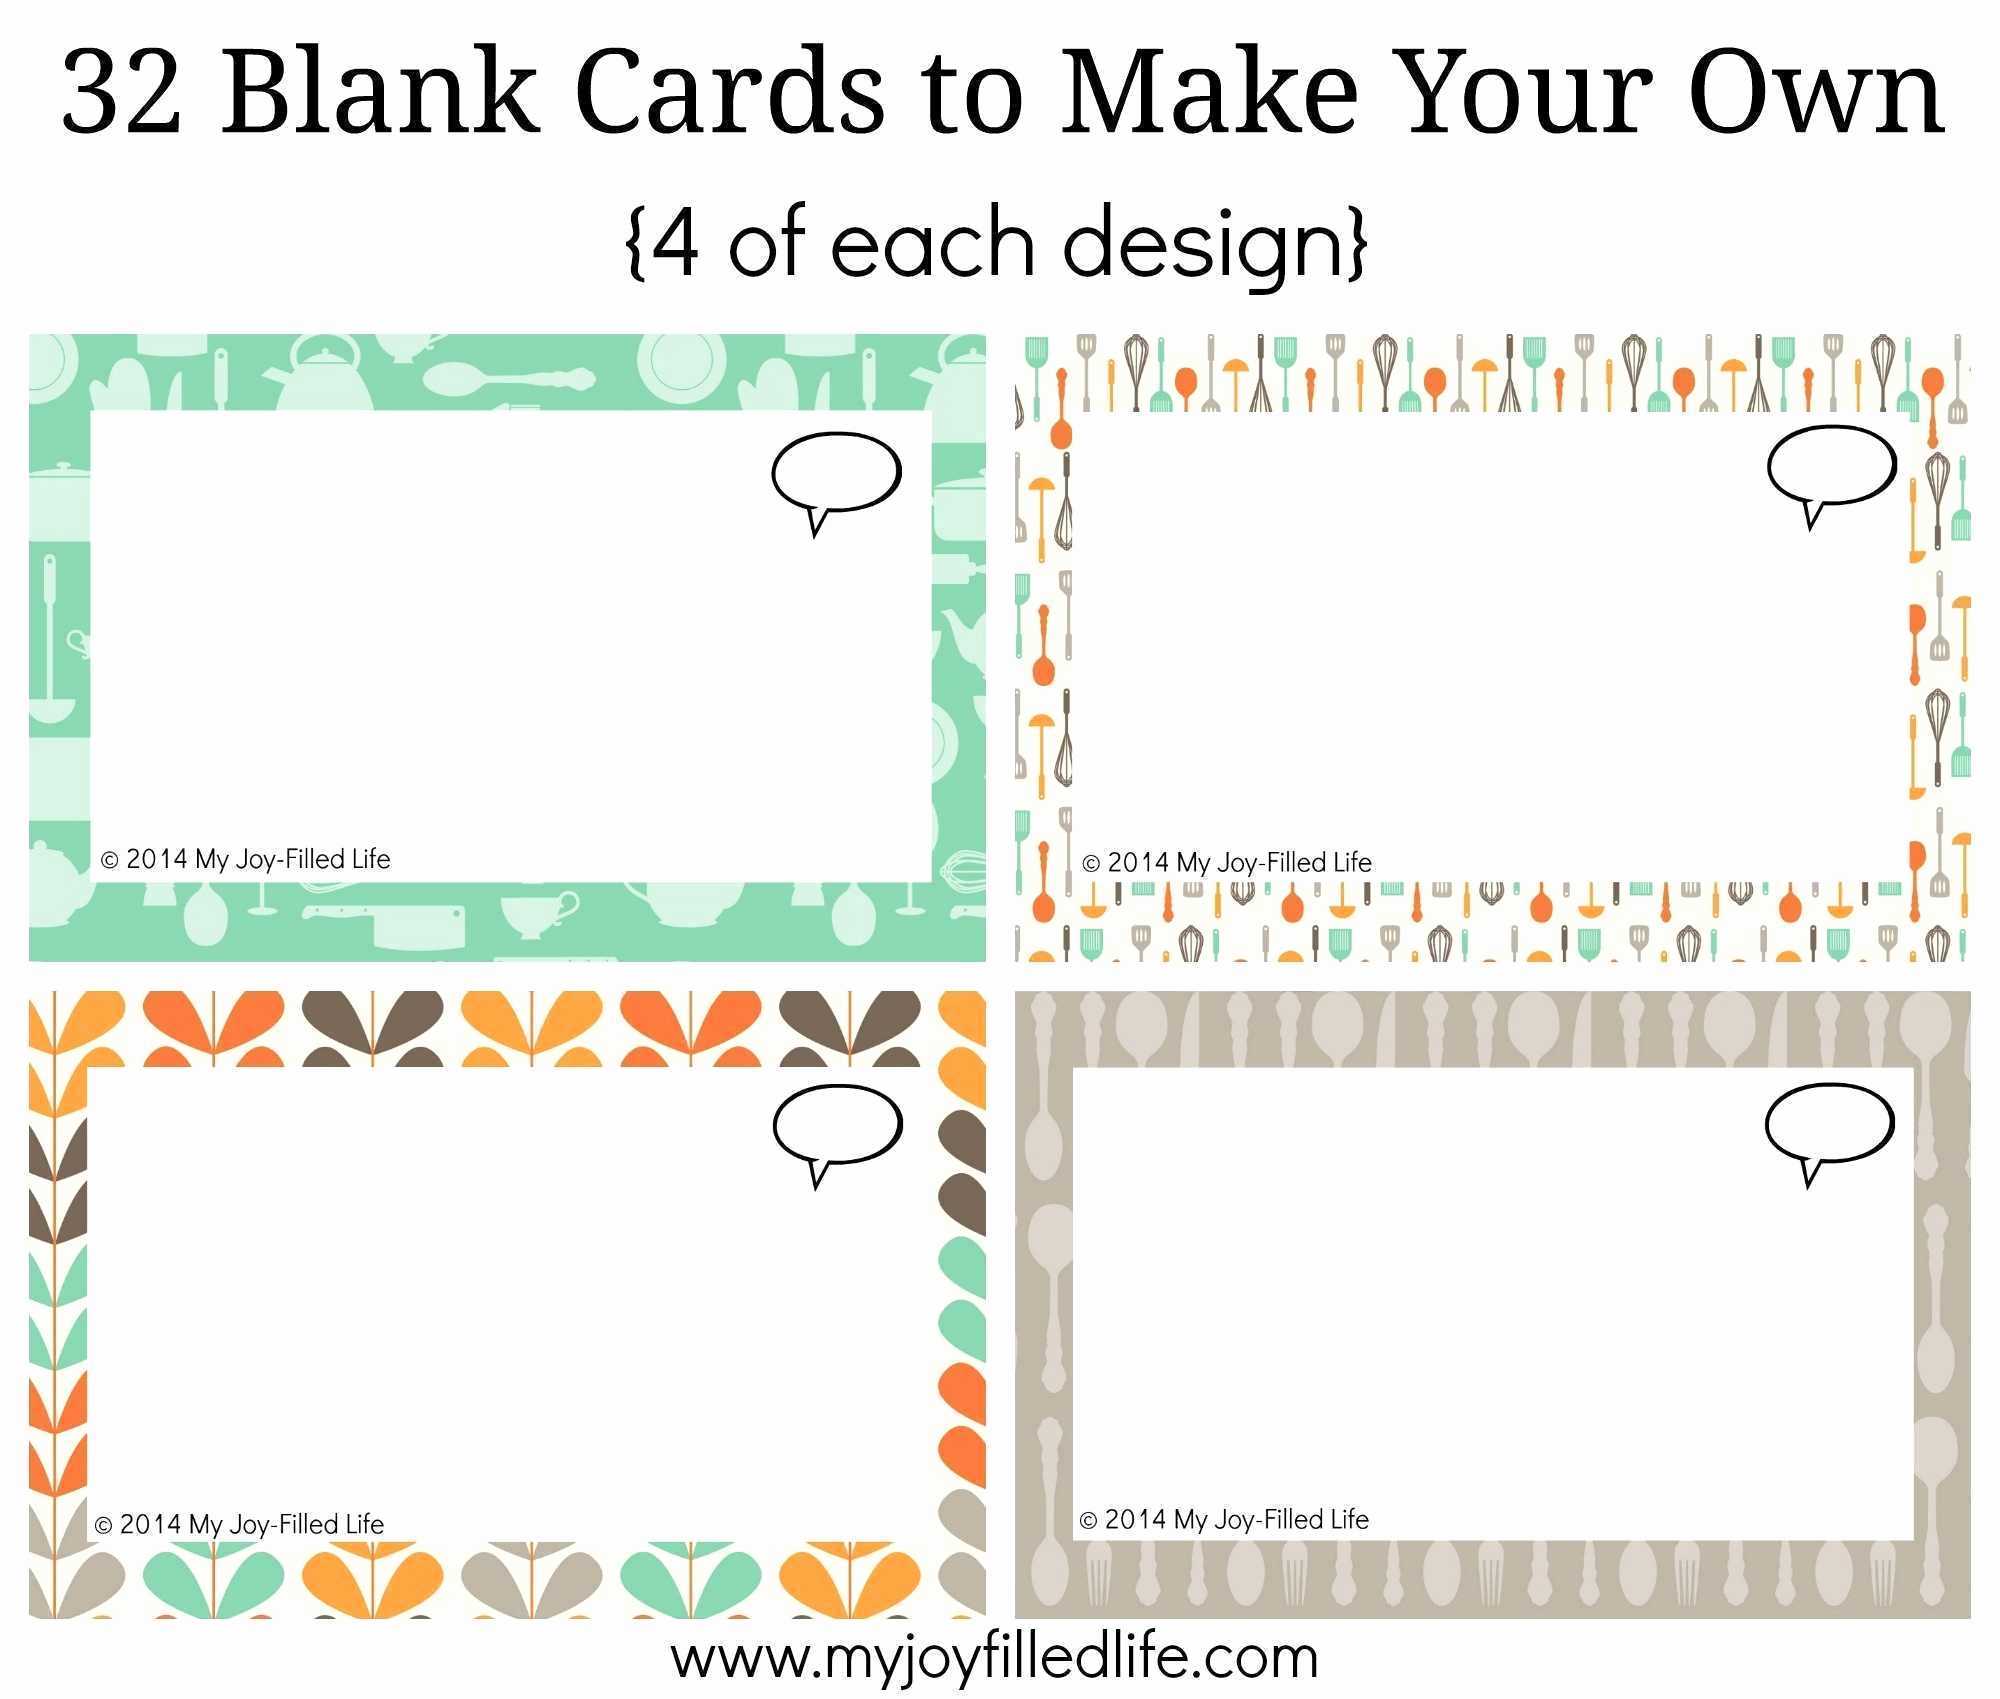 20 Make Free Business Cards Online Printable – Guiaubuntupt - Make Your Own Business Cards Free Printable